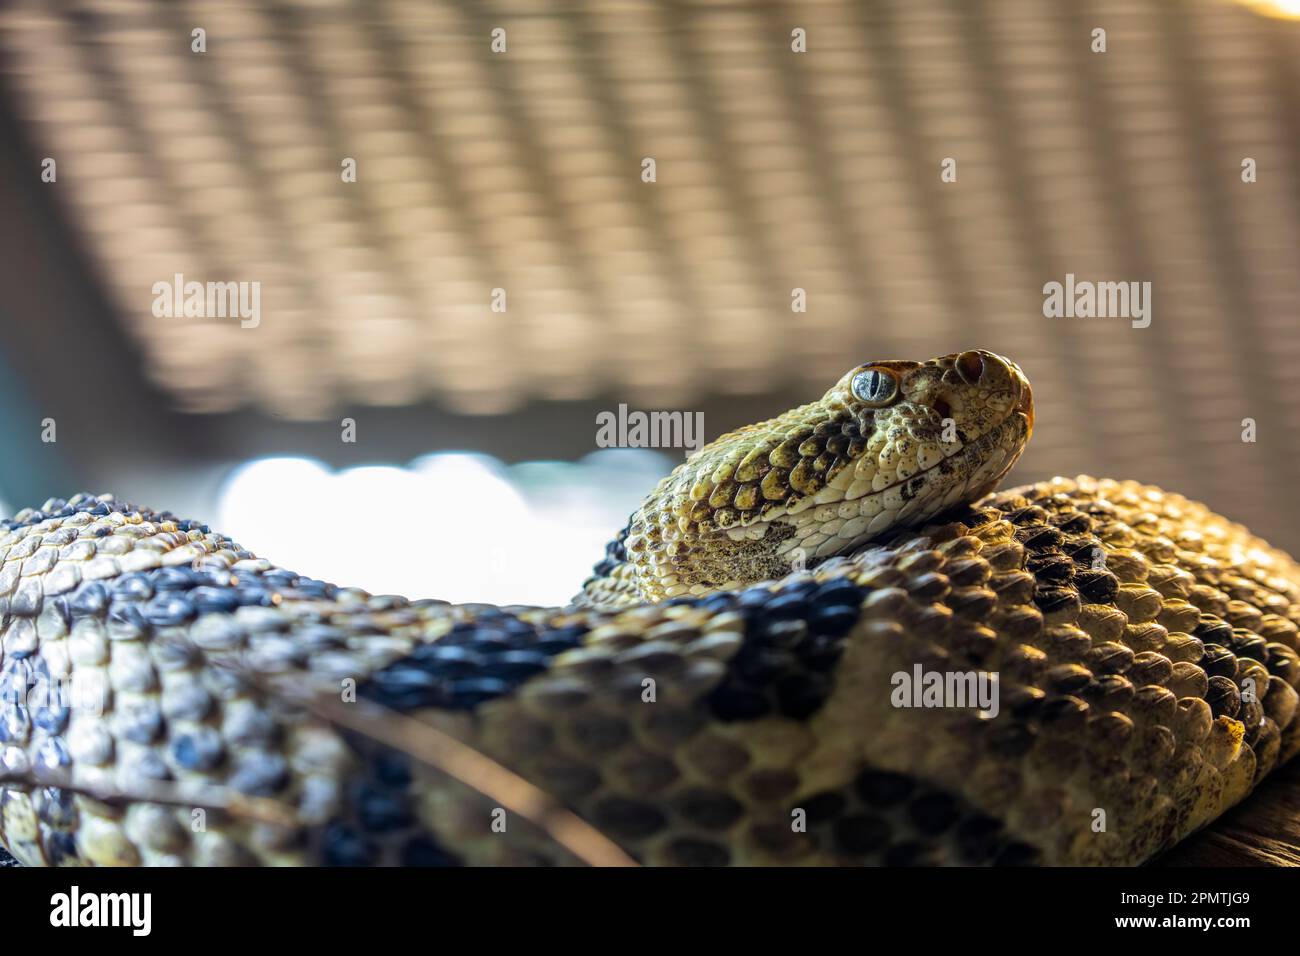 Timber rattlesnake (Crotalus horridus) is a species of pit viper endemic to eastern North America.  it is venomous, with a very toxic bite. Stock Photo